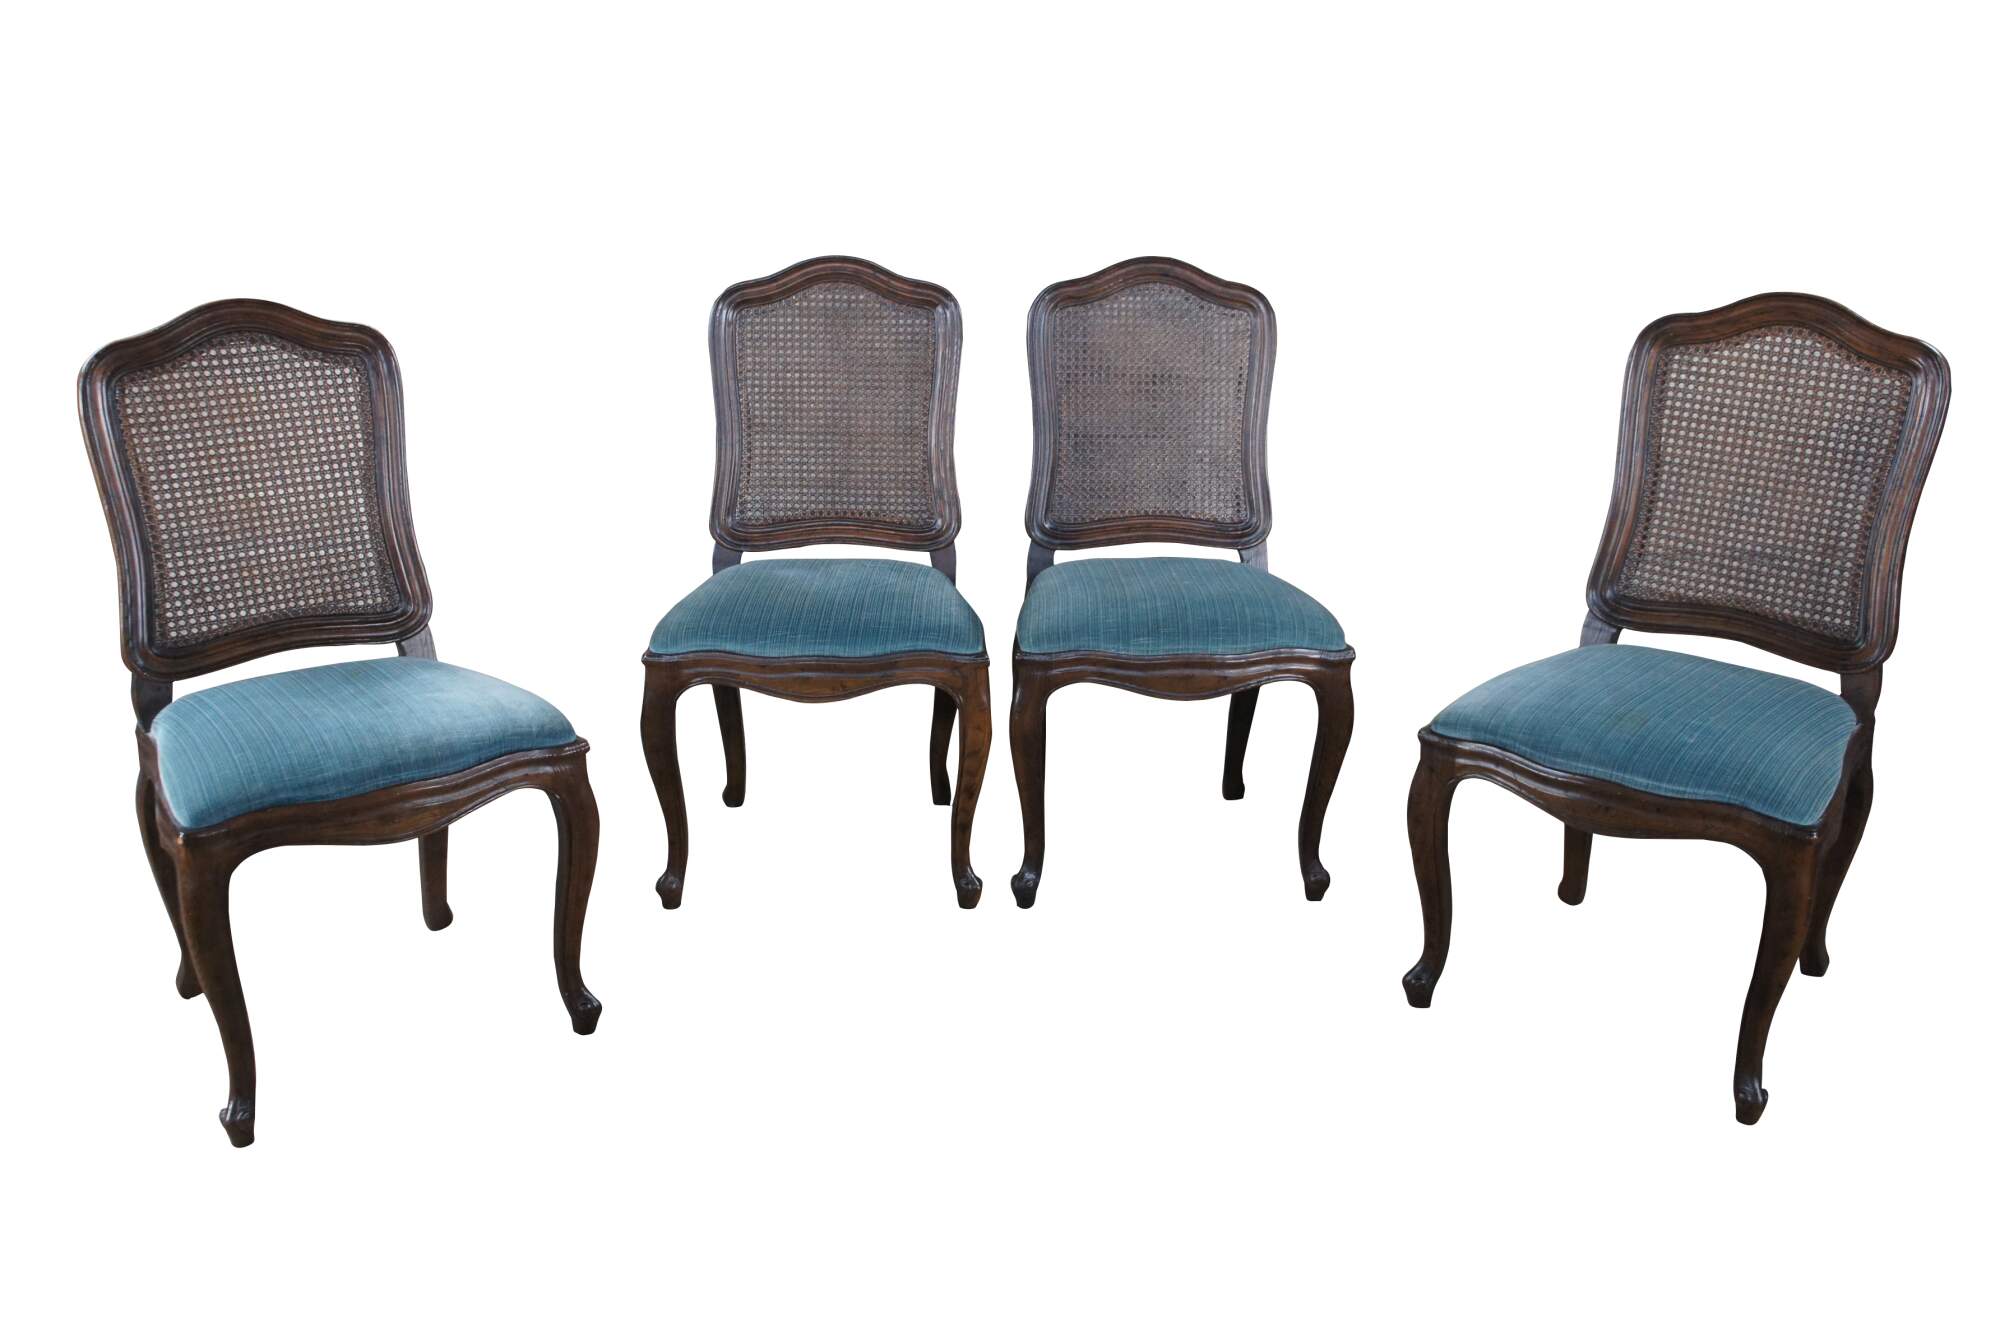 Vintage French Louis XV Style Cane Chairs/bohemian/antique 